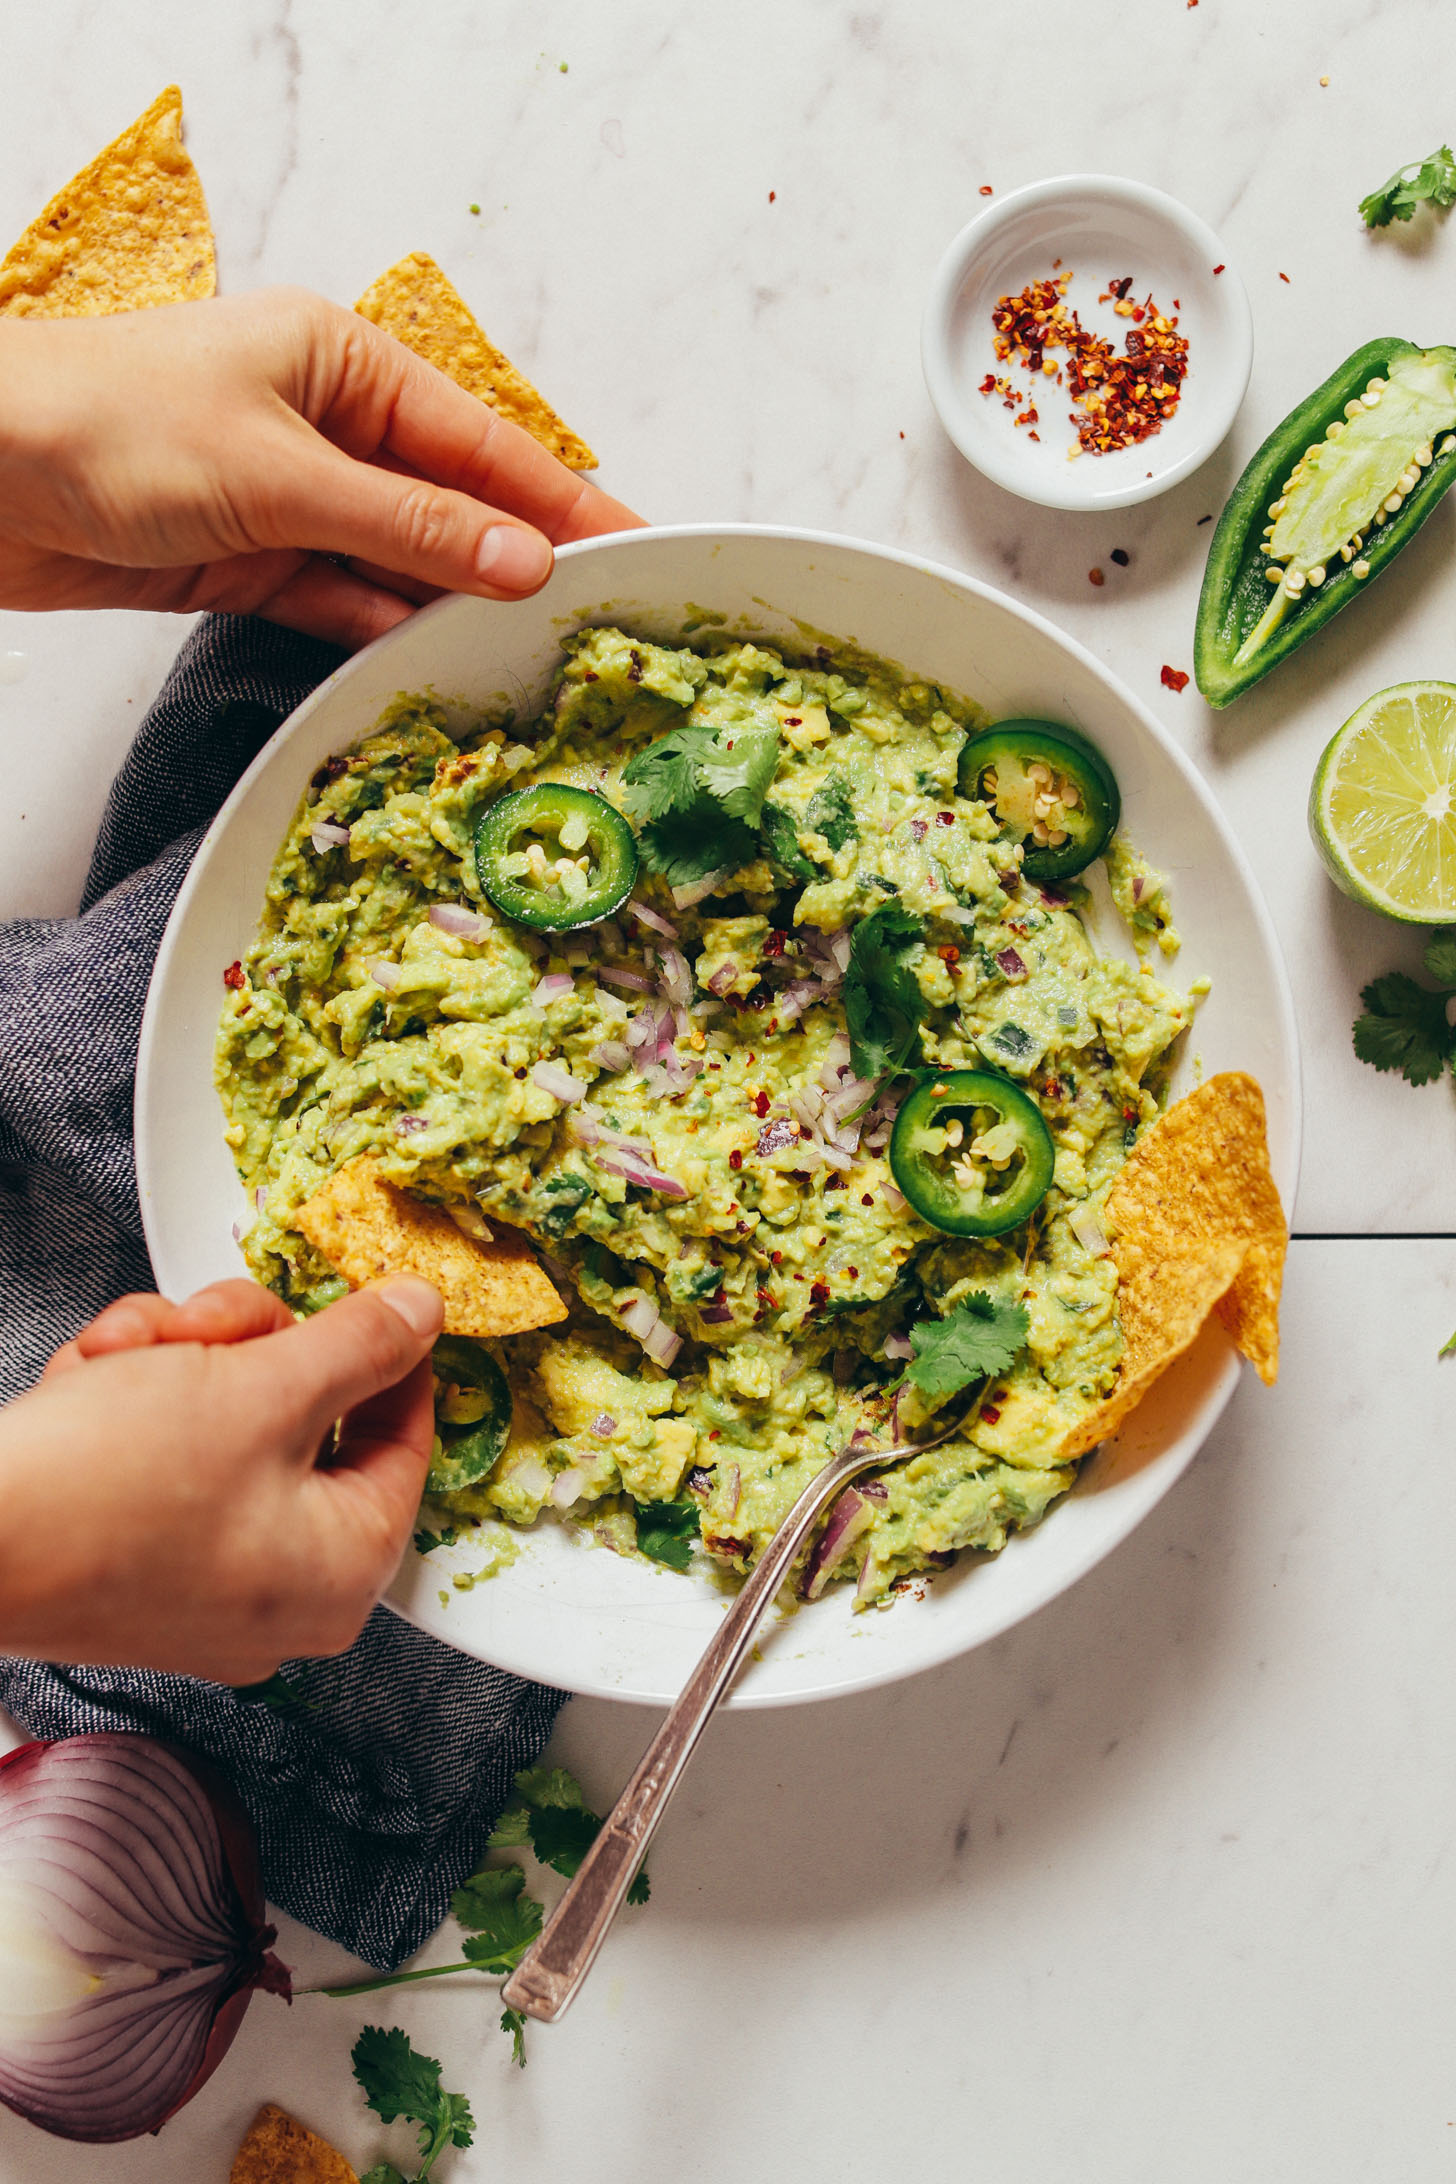 Overhead image of guacamole in a white bowl garnished with fresh jalapenos, and a hand with a chip scooping some guacamole